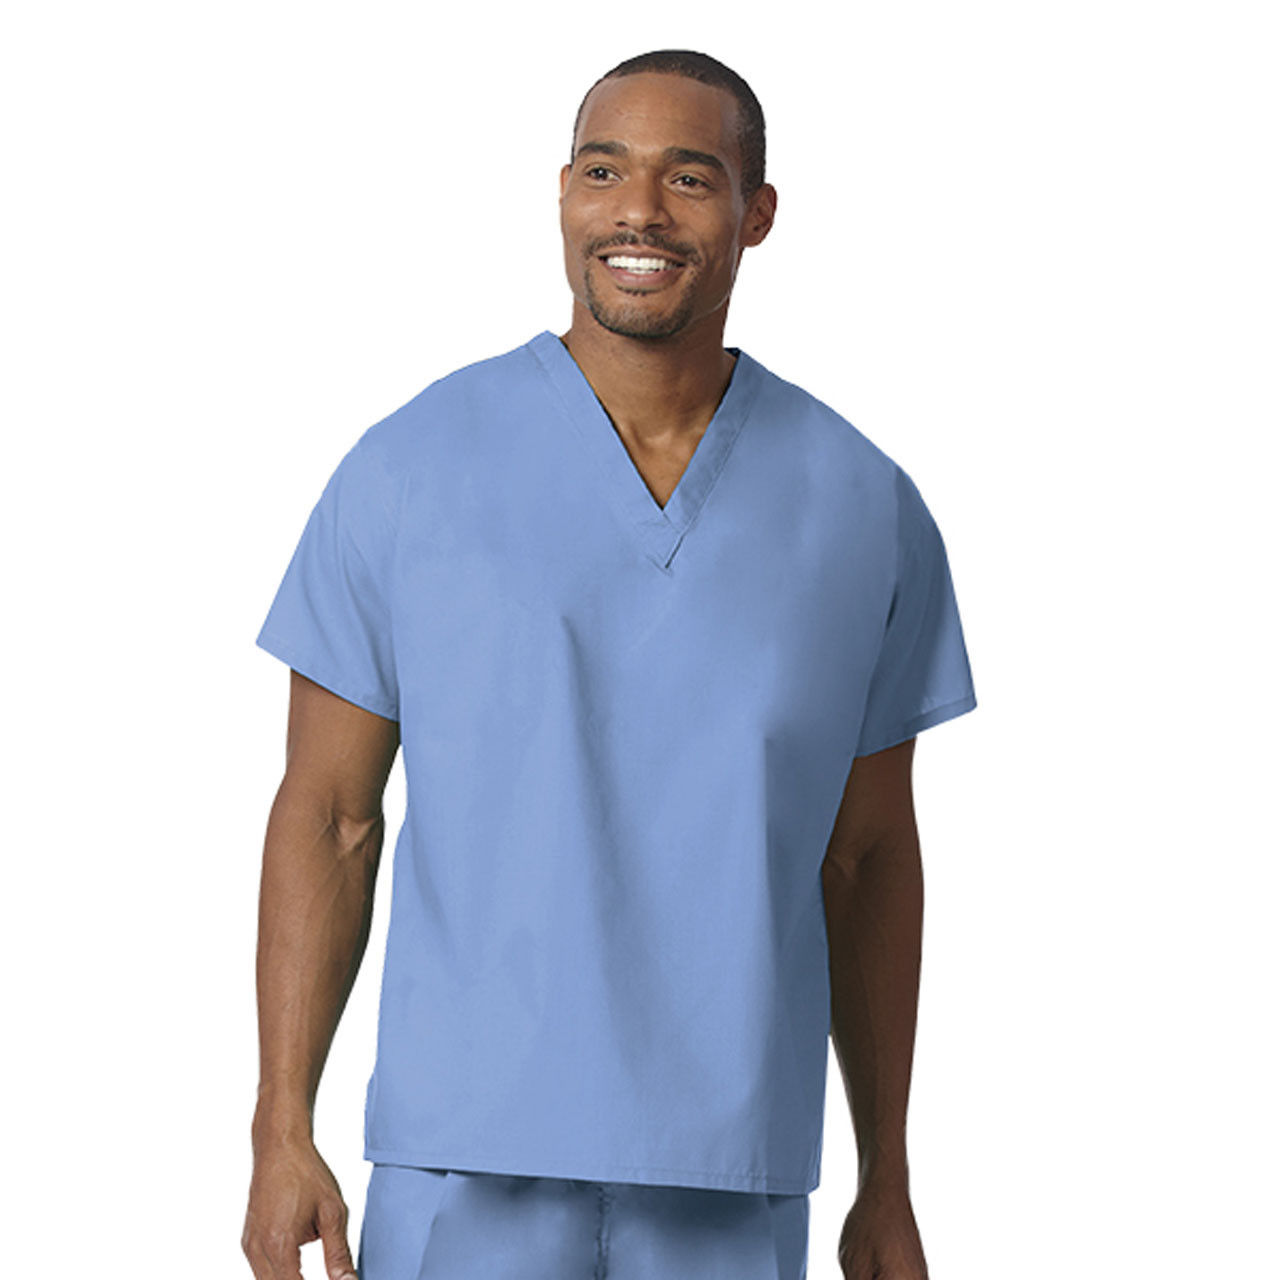 Does the blue surgical scrubs set reverse to a different color and is it unisex?